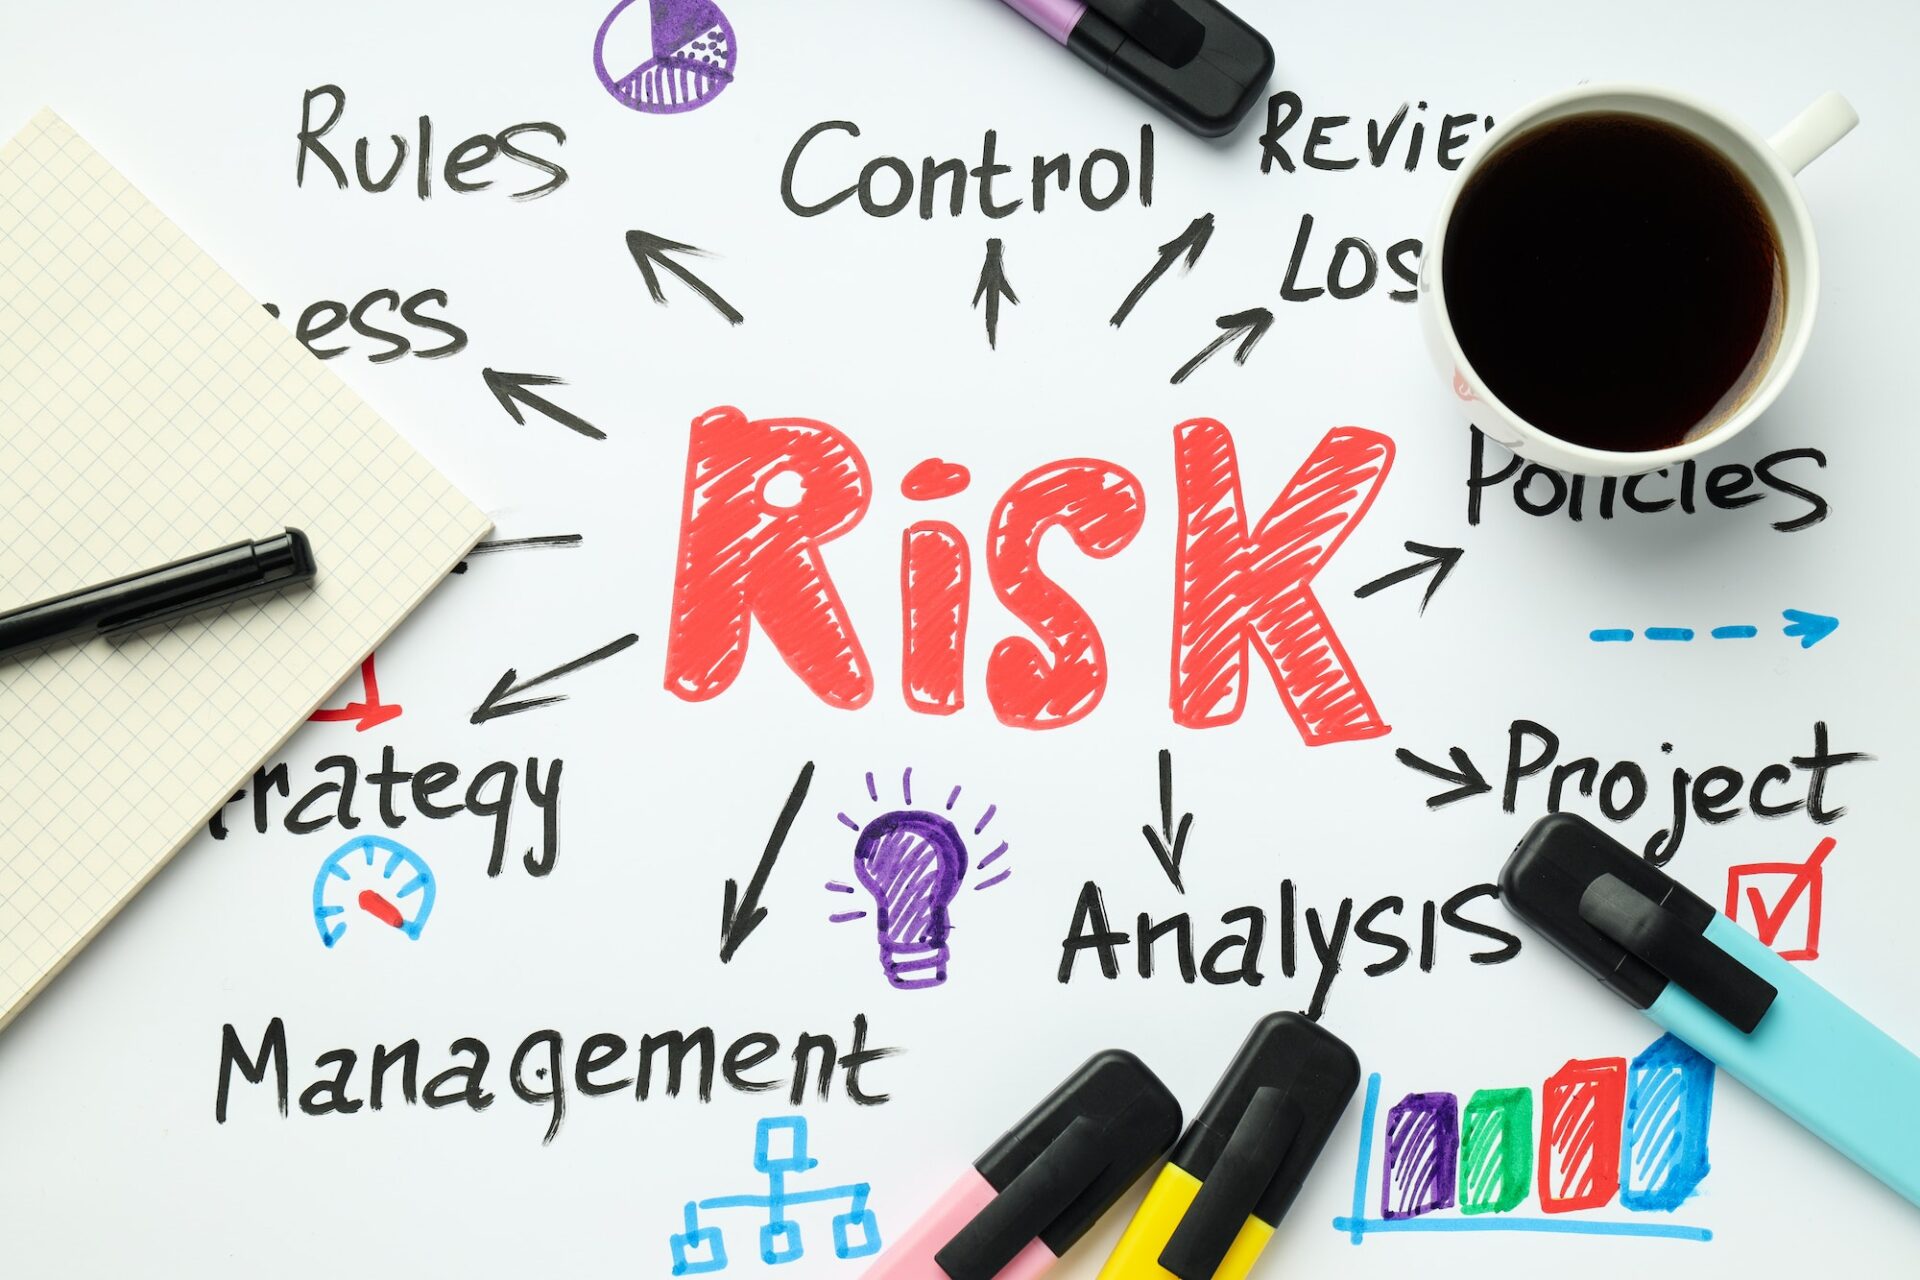 Risk protection and eliminating the risk, top view